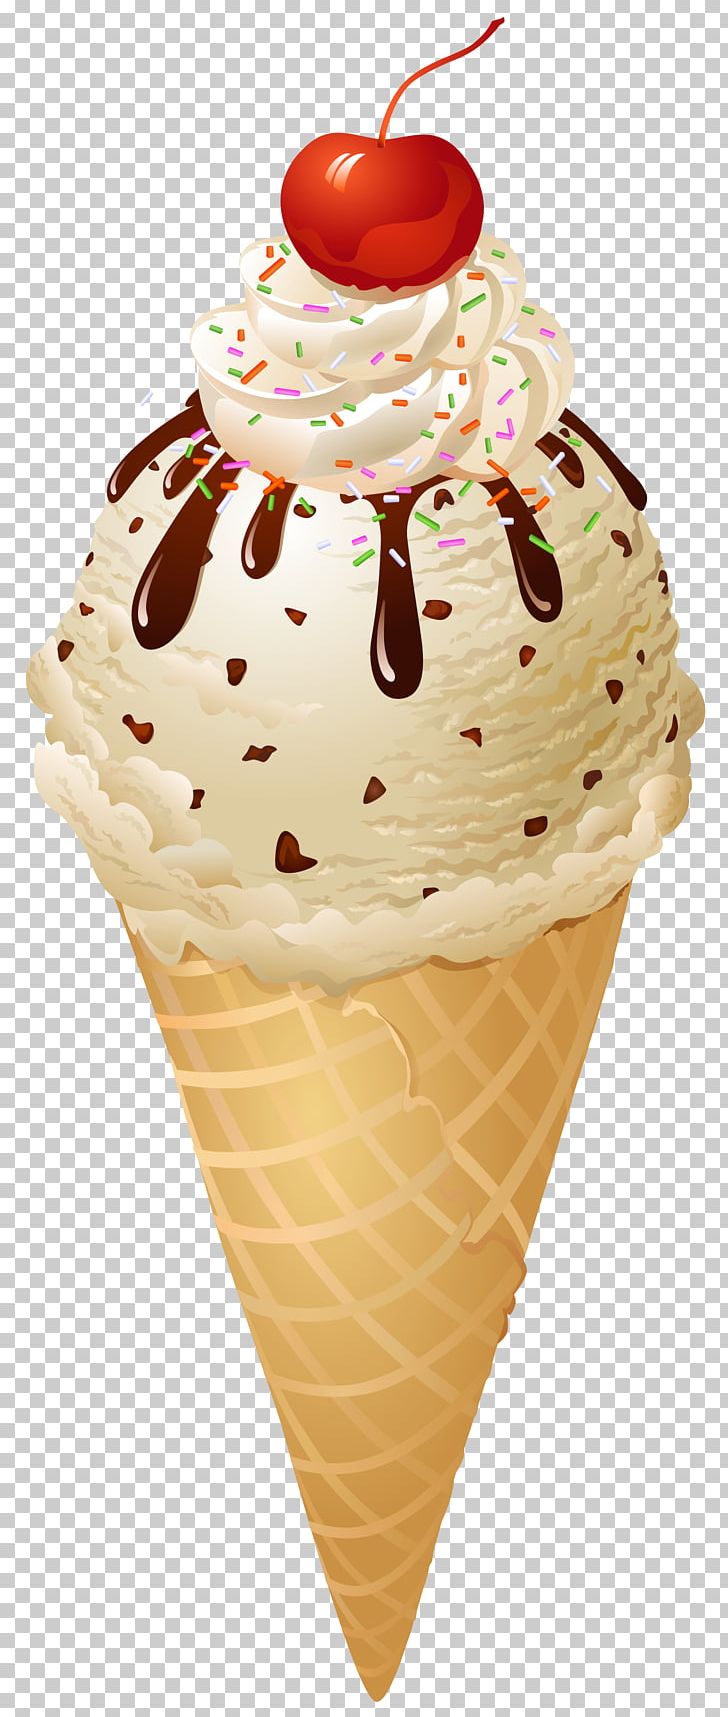 Ice Cream Cone Apple Pie PNG, Clipart, Apple Pie, Chocolate Ice Cream, Clipart, Cream, Dairy Product Free PNG Download